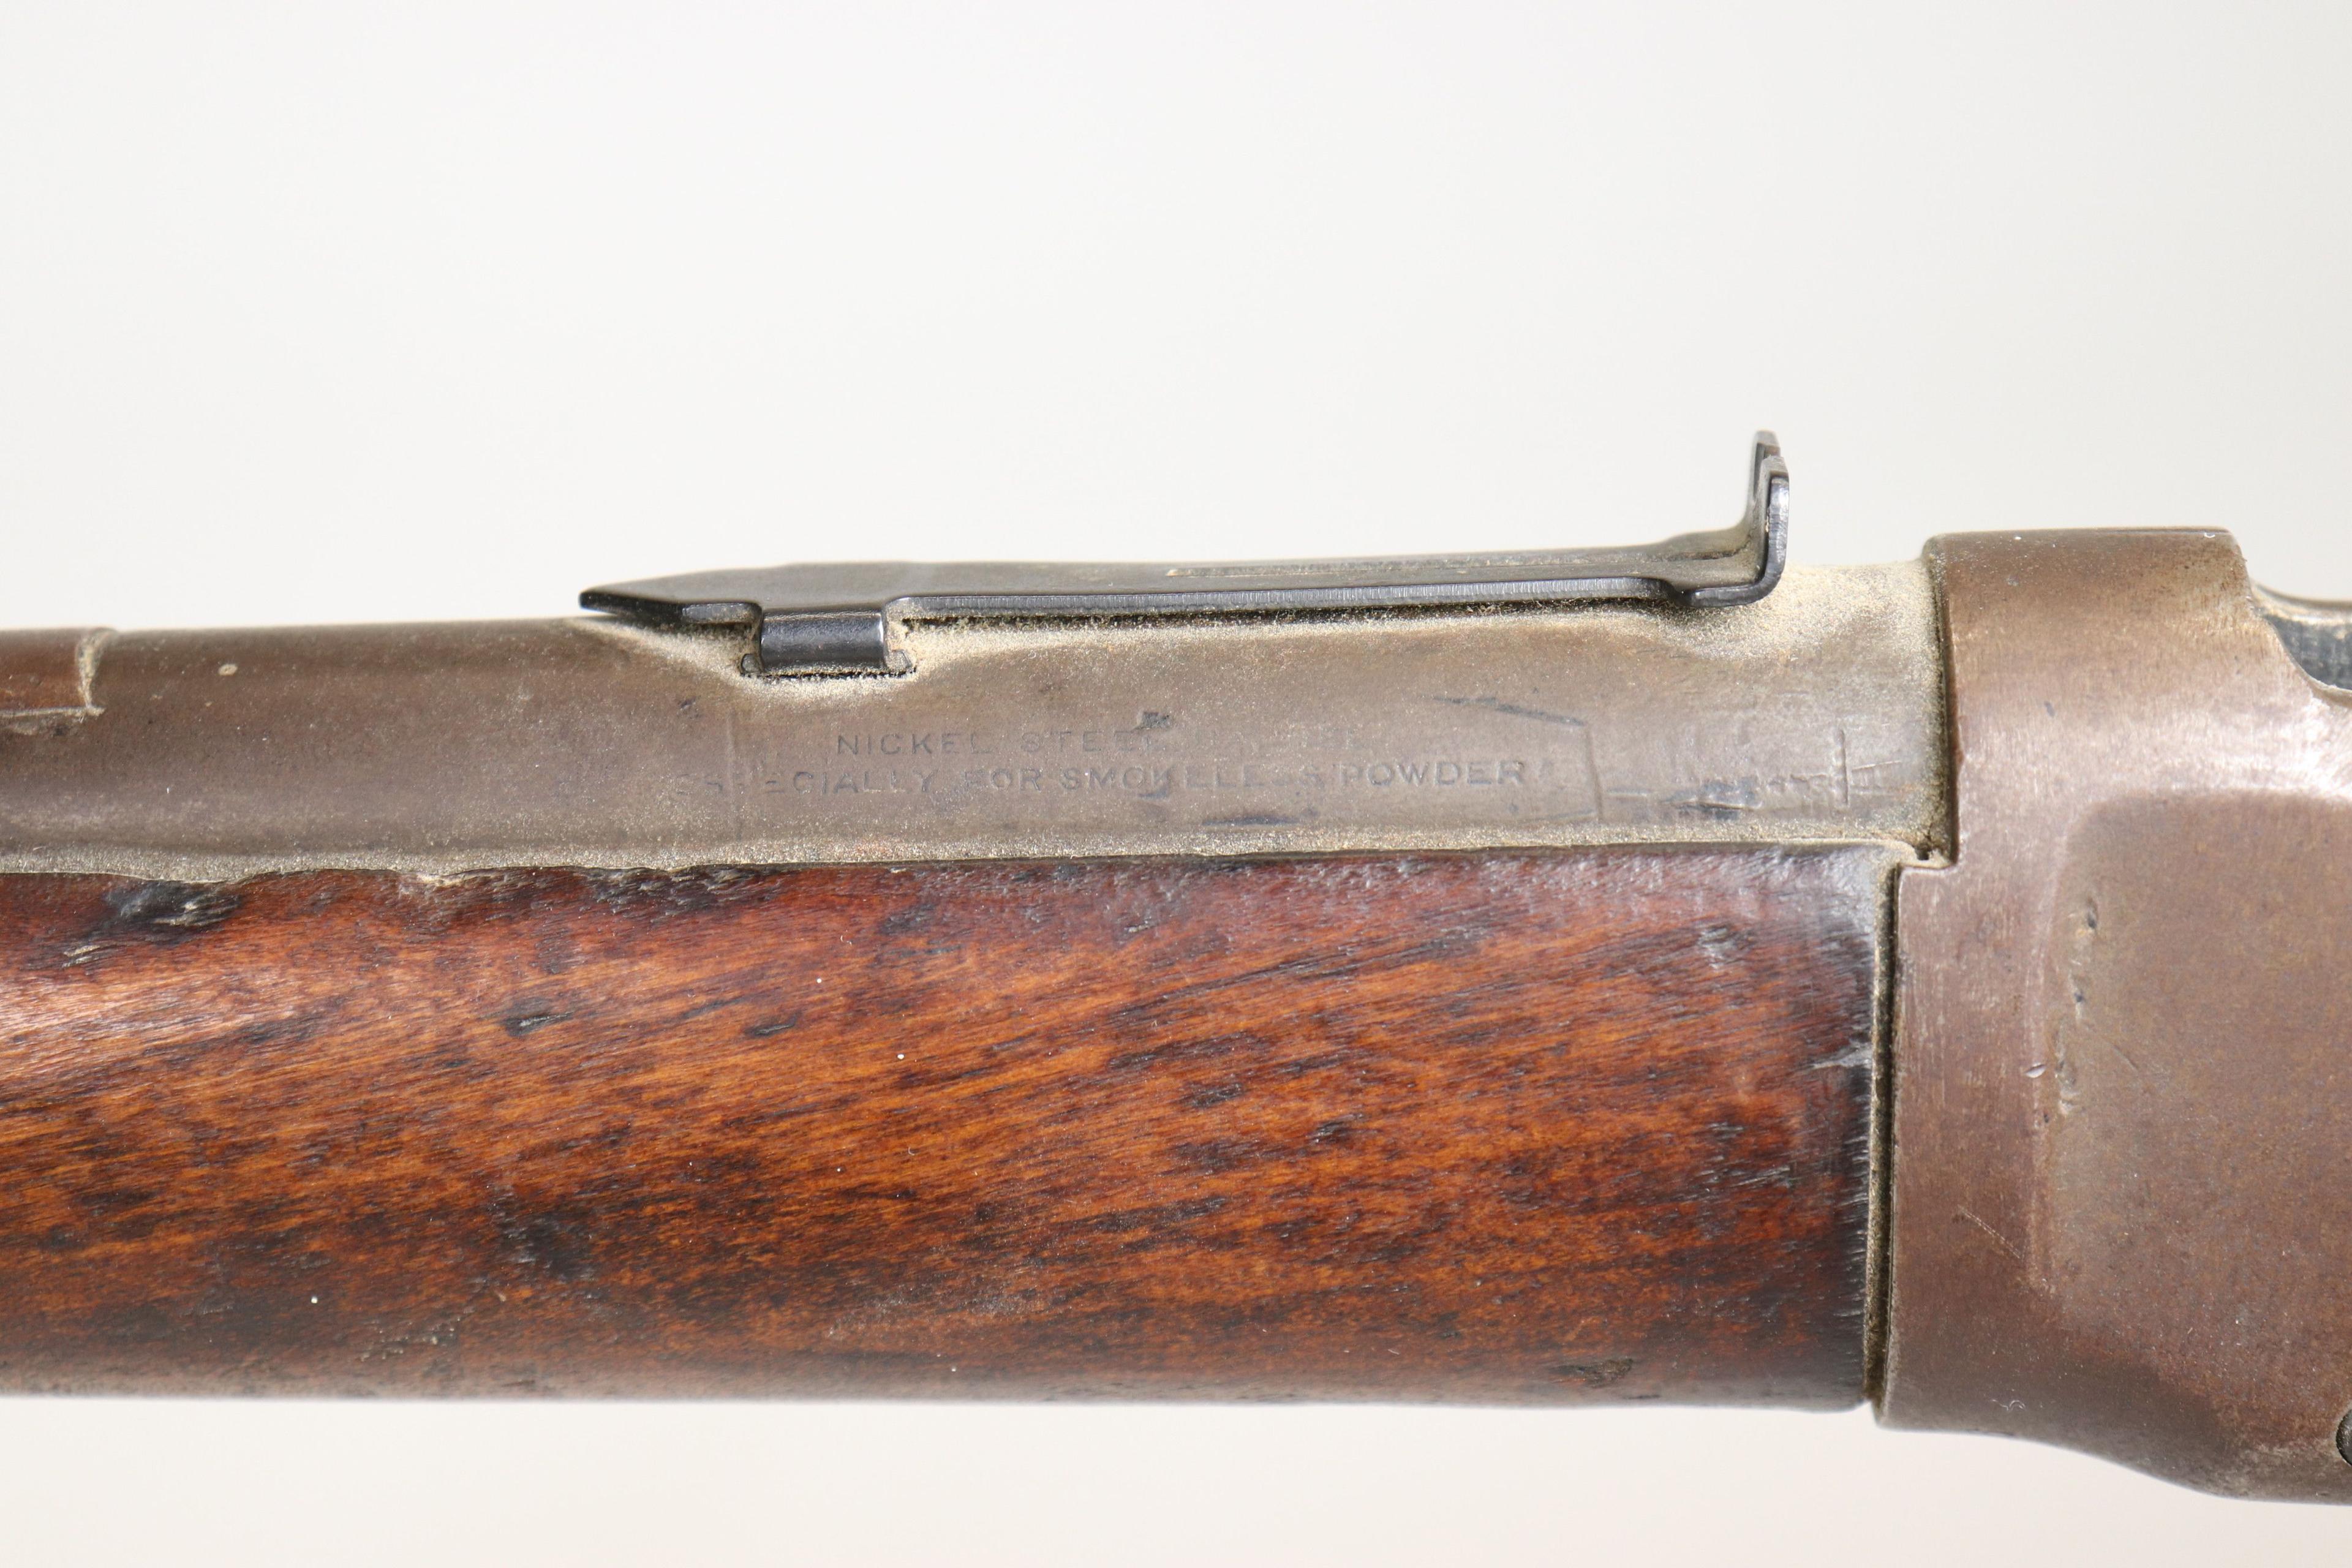 Winchester 1894 30-30  SN: 433376